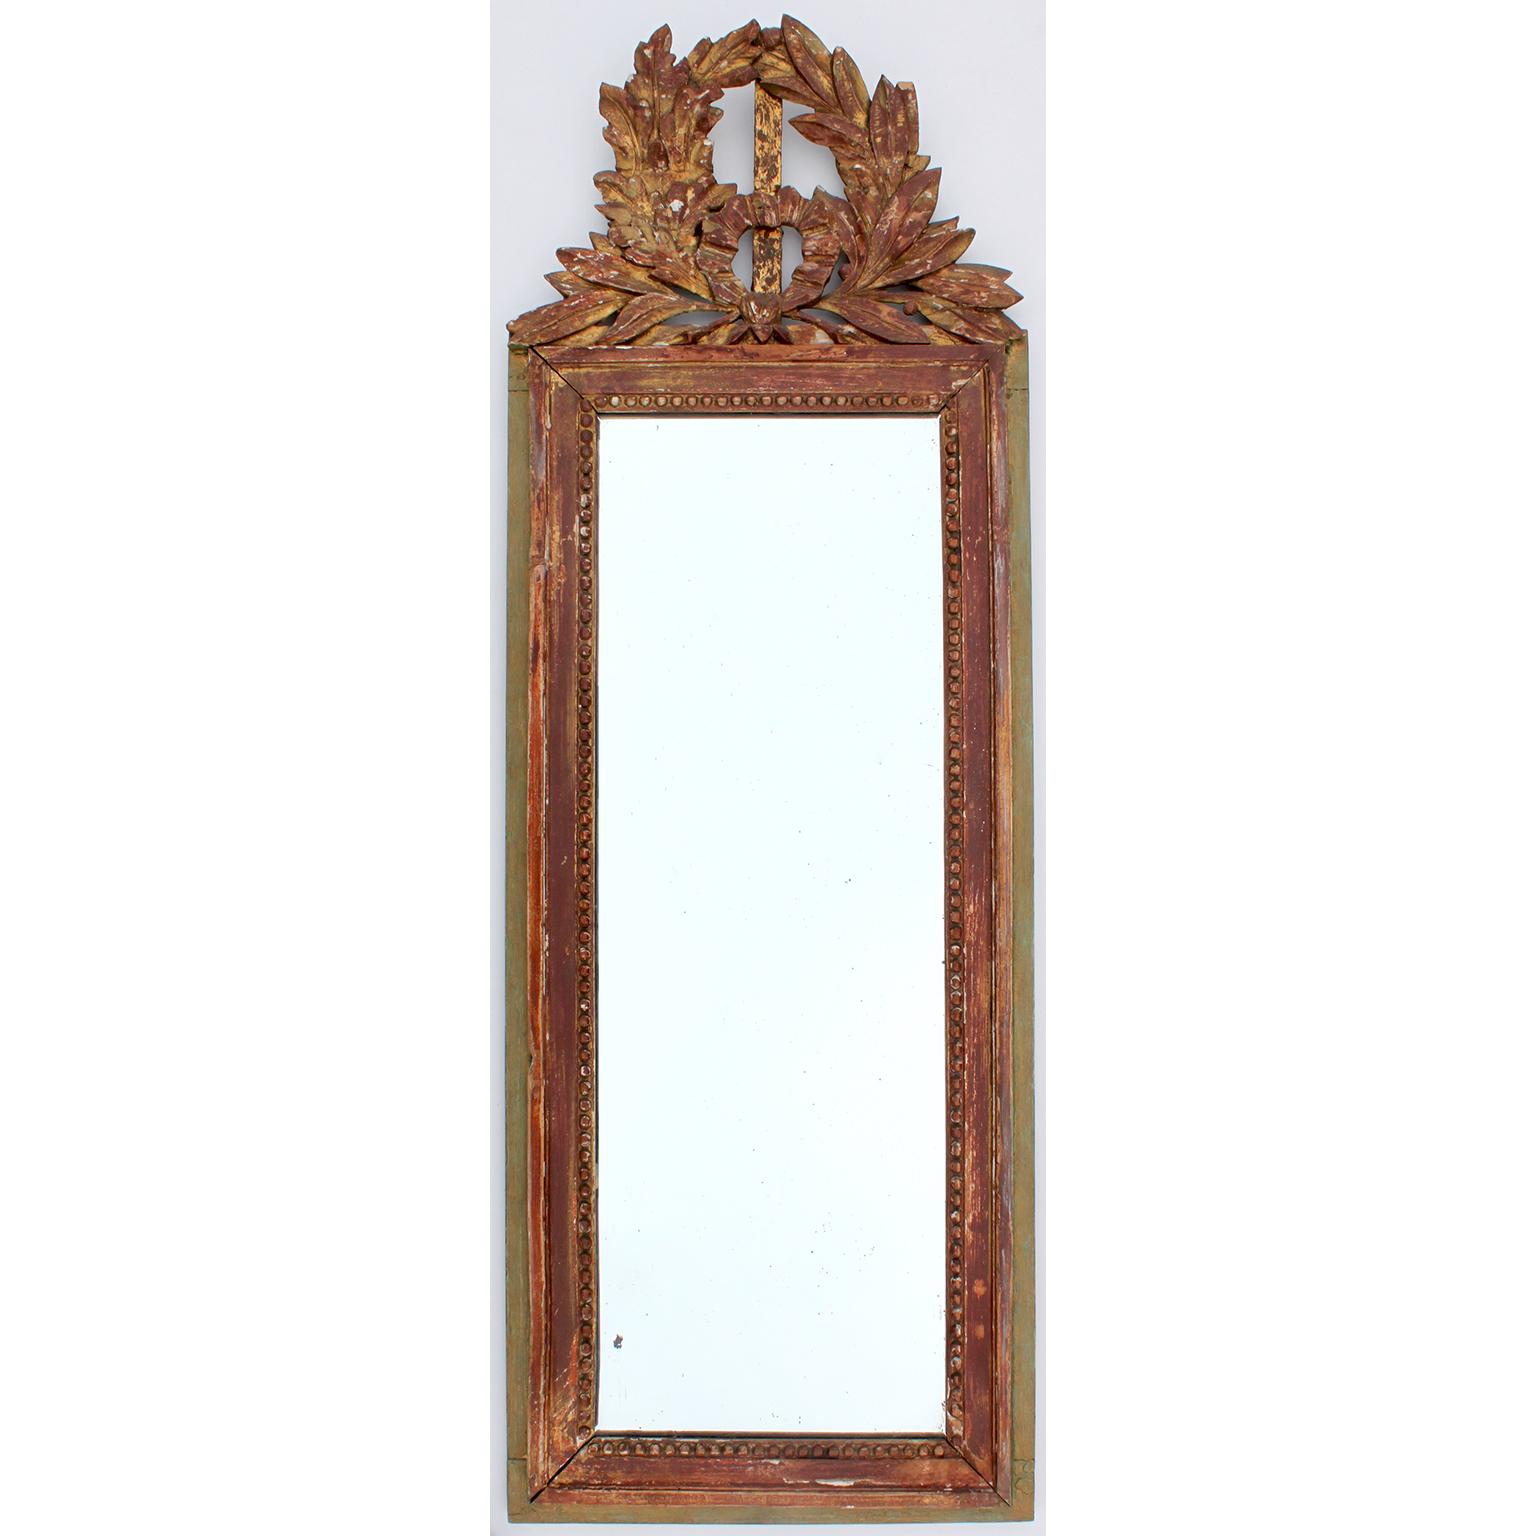 A Pair French 19th-20th century Regency Style Giltwood & Green Paint Wall Mirrors. circa: 1900.